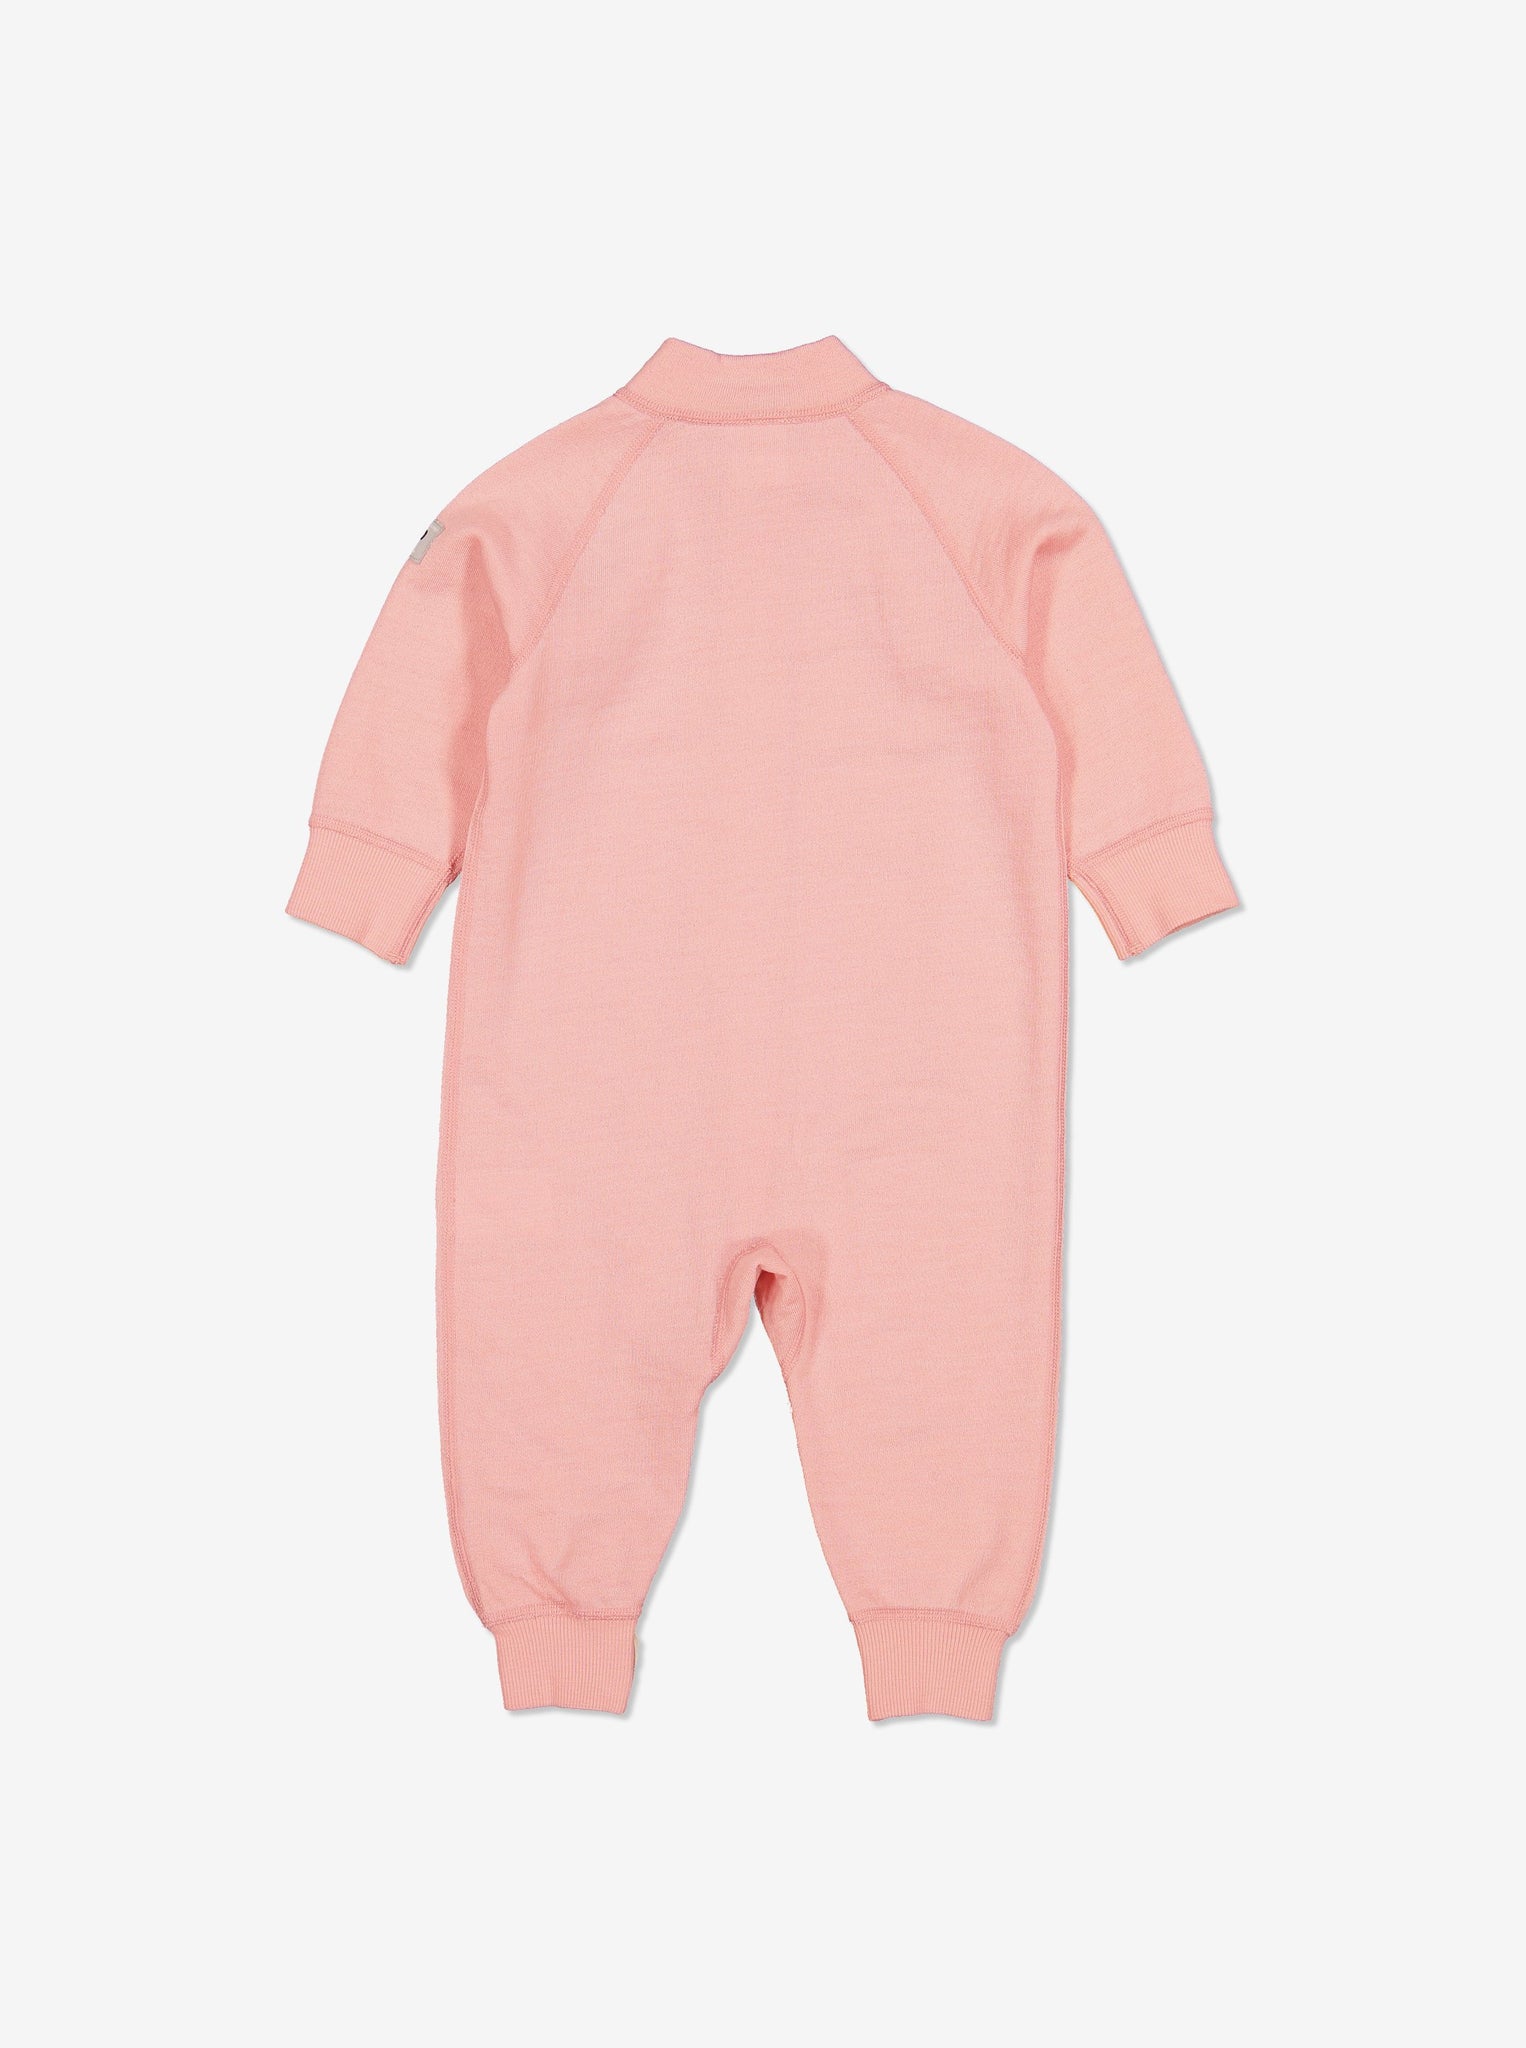 Thermal Merino All-In-One-1m-3y-Pink-Girl